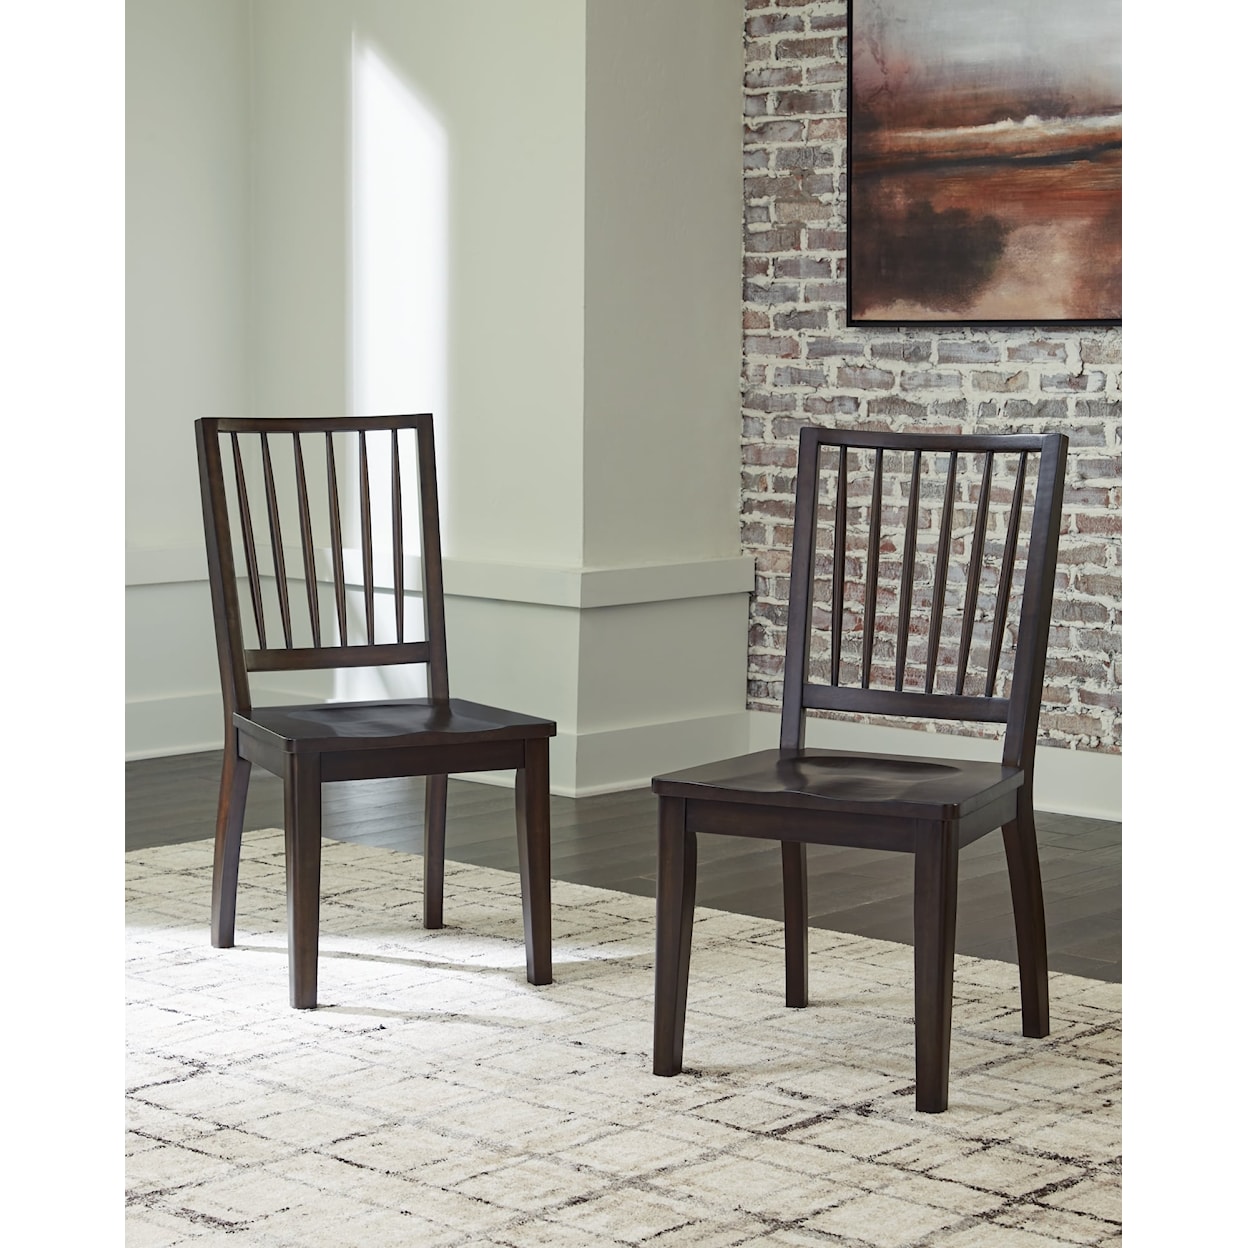 Signature Design by Ashley Charterton Dining Room Side Chair